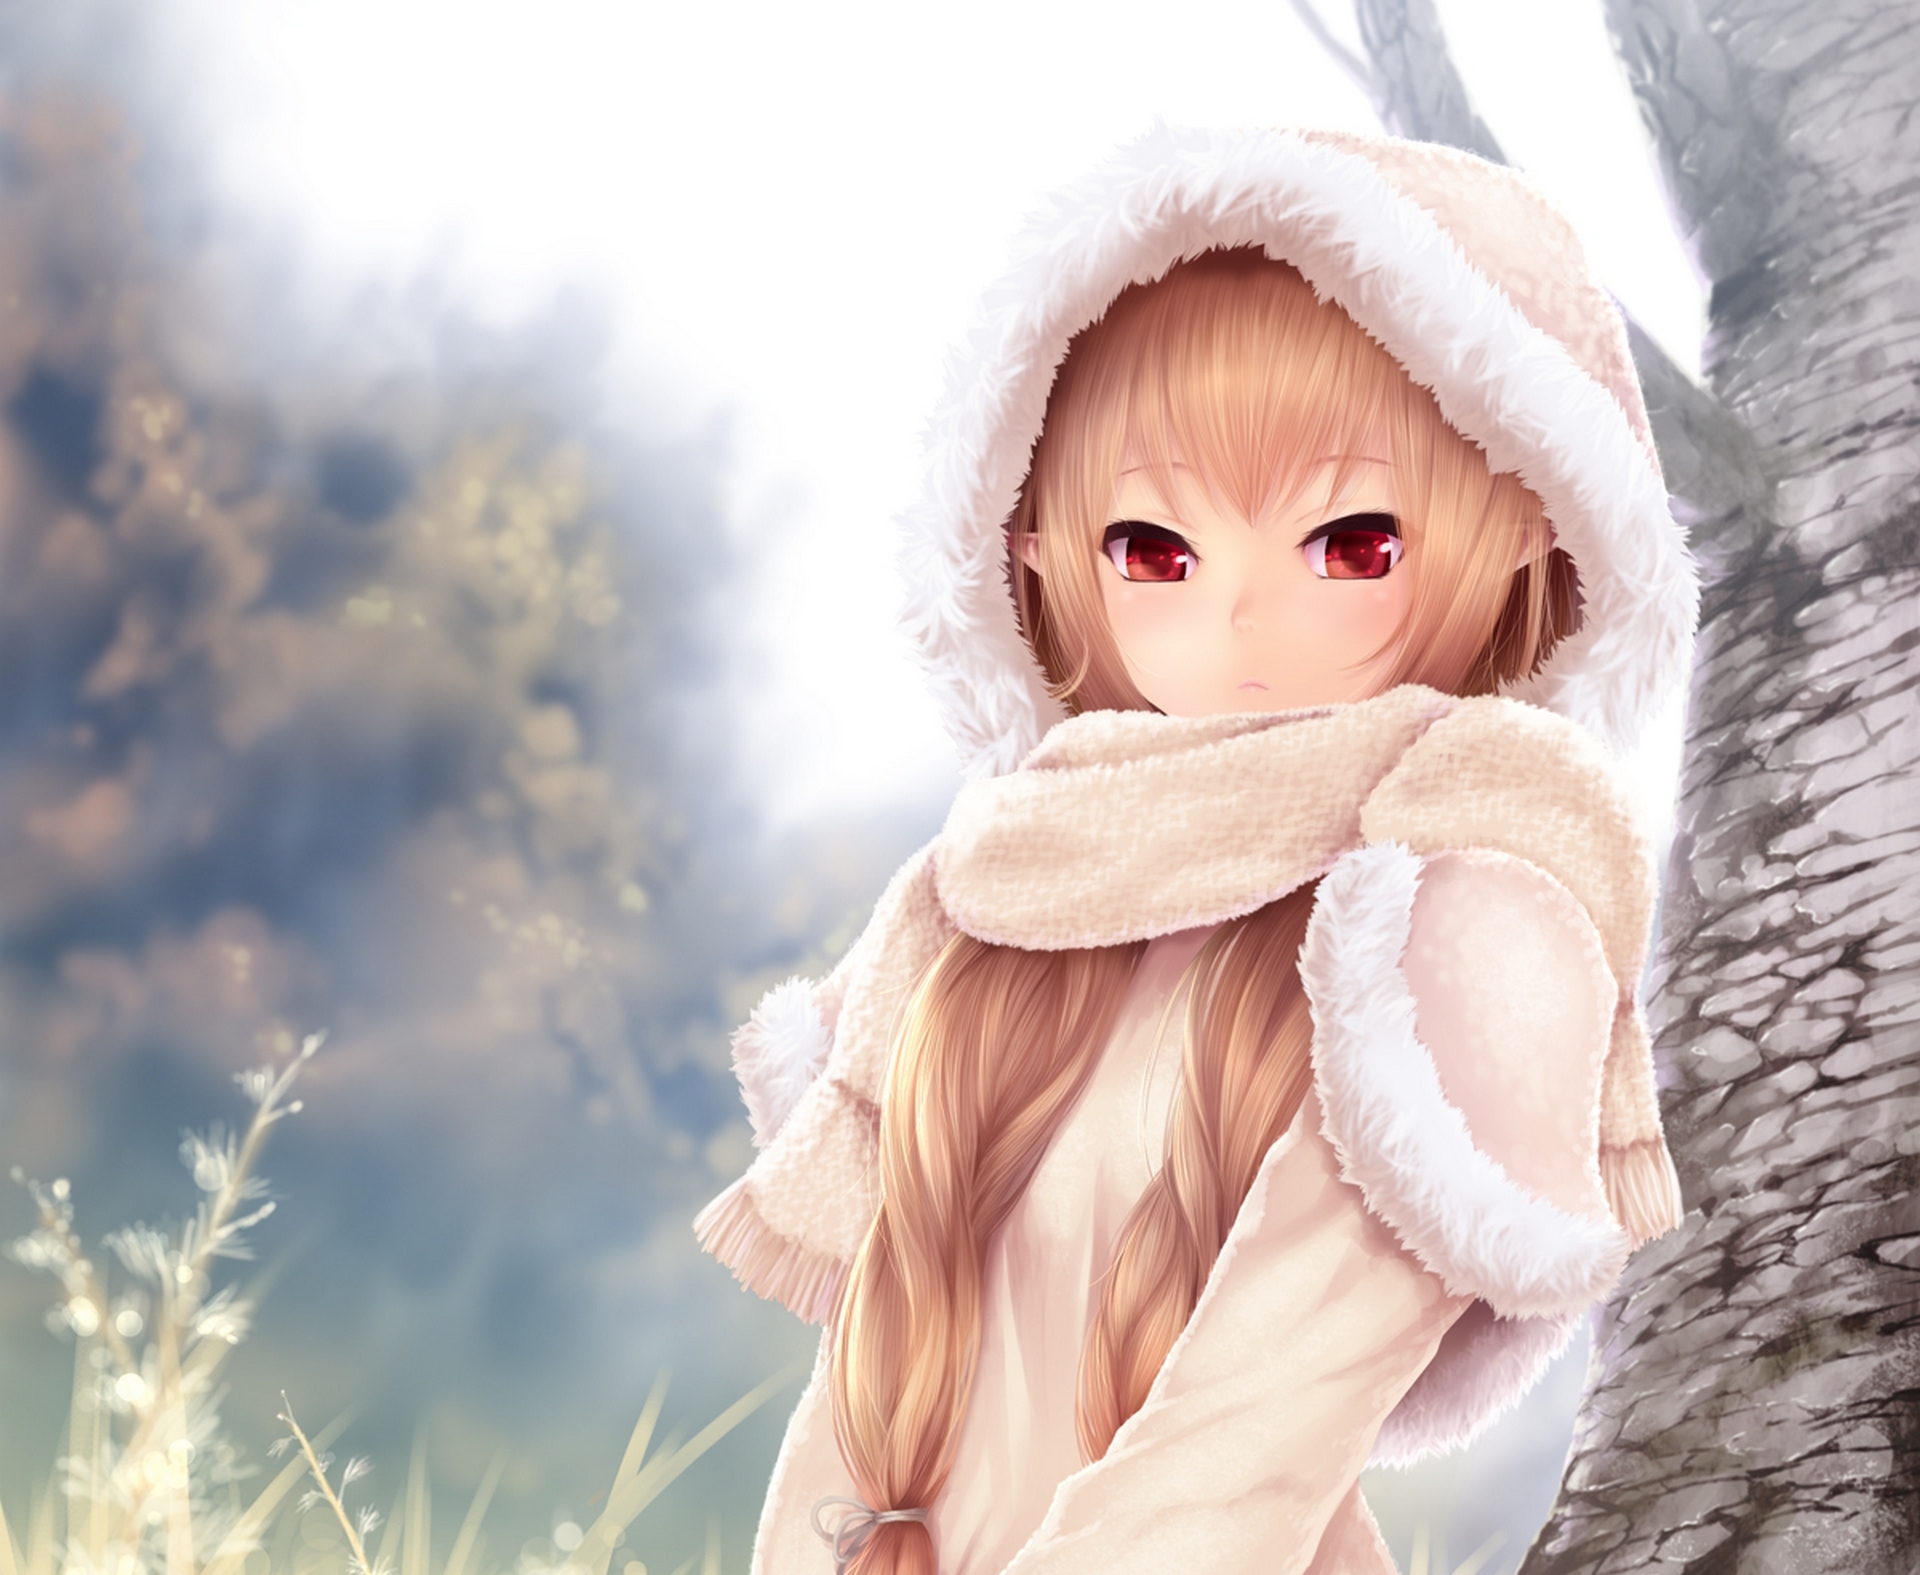 girl, anime, winter Wallpaper, HD Anime 4K Wallpapers, Images and